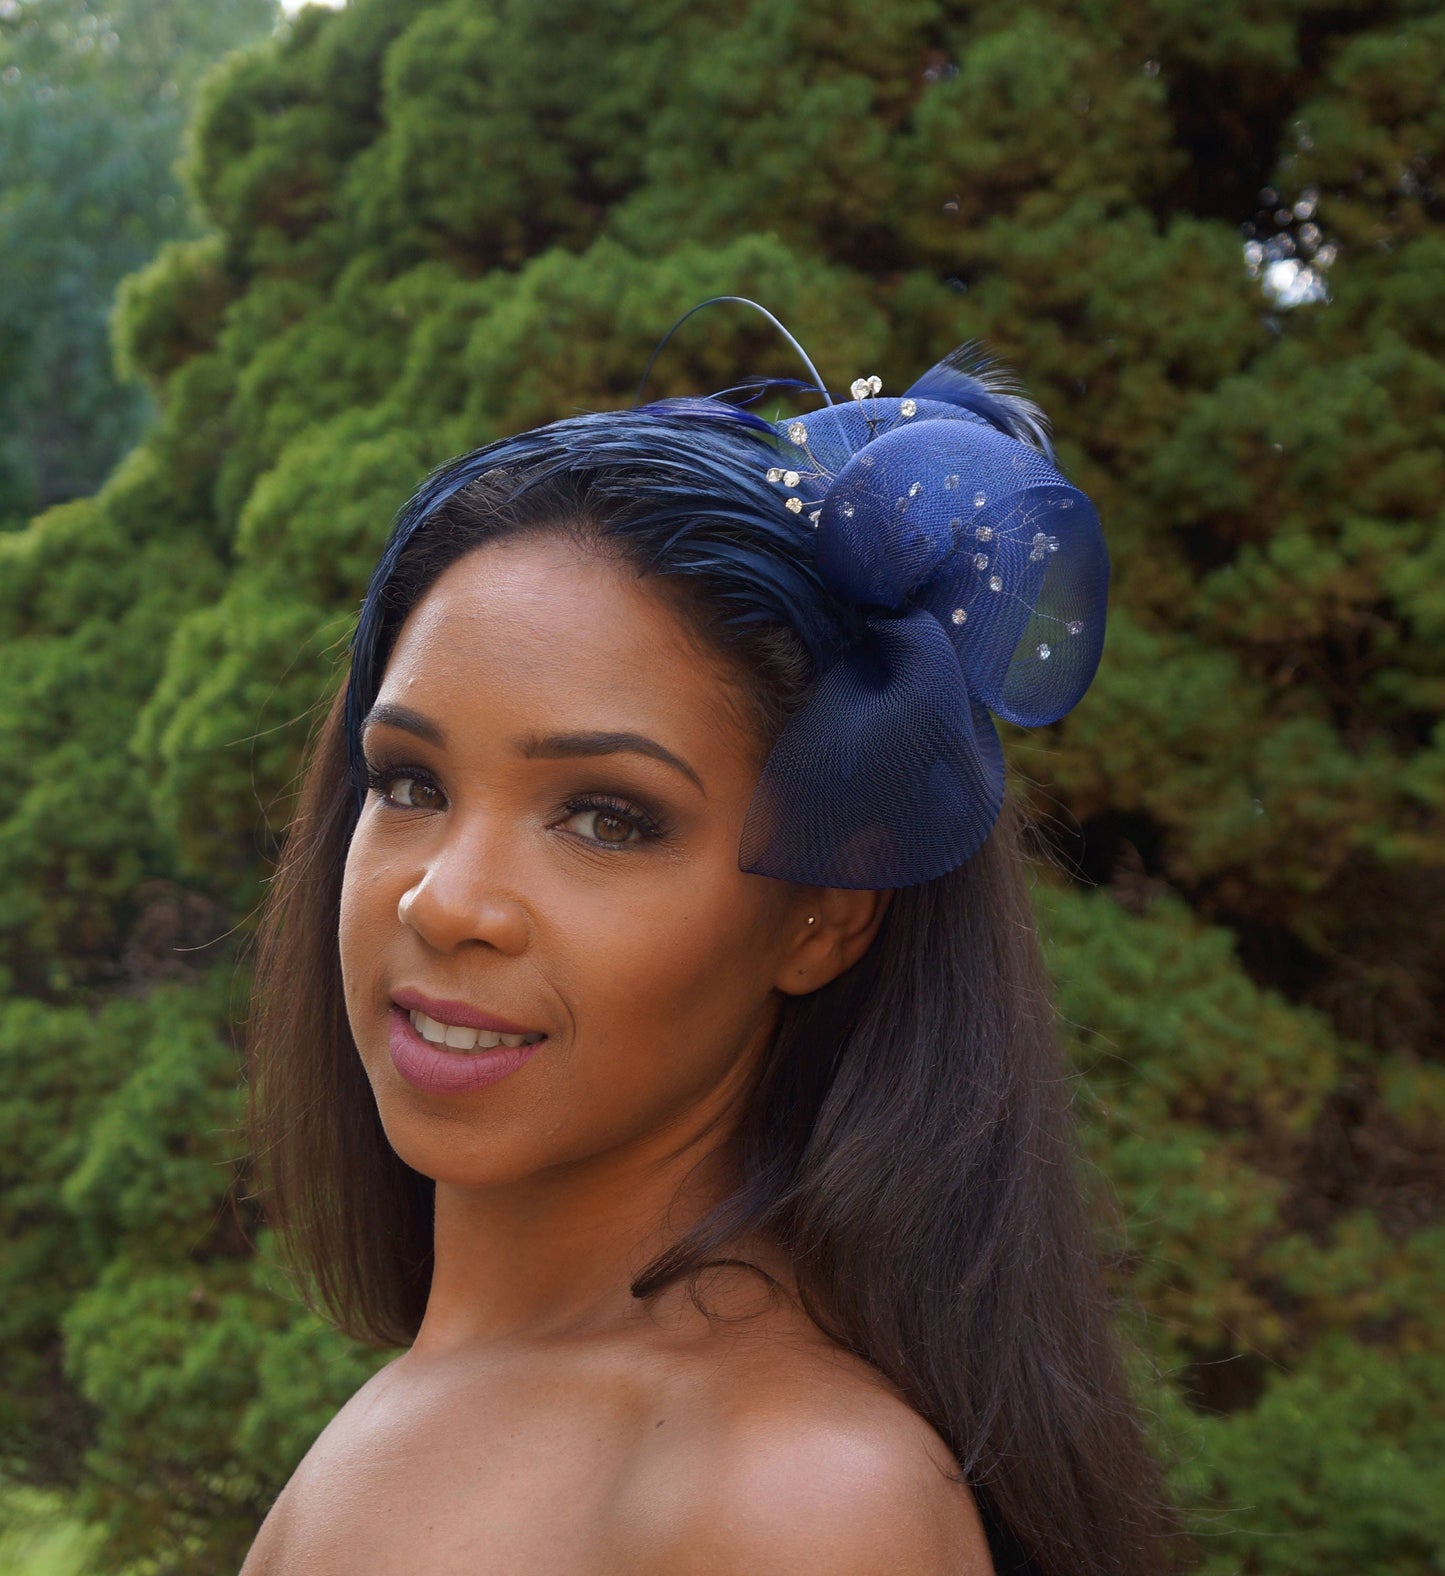 ROYAL BLUE Feather headband-Crinoline-bling Perfect for ALL Occasions-Weddings-Brides Maids-Proms-Races-Parties-Teens-Holidays-Polo Matches-